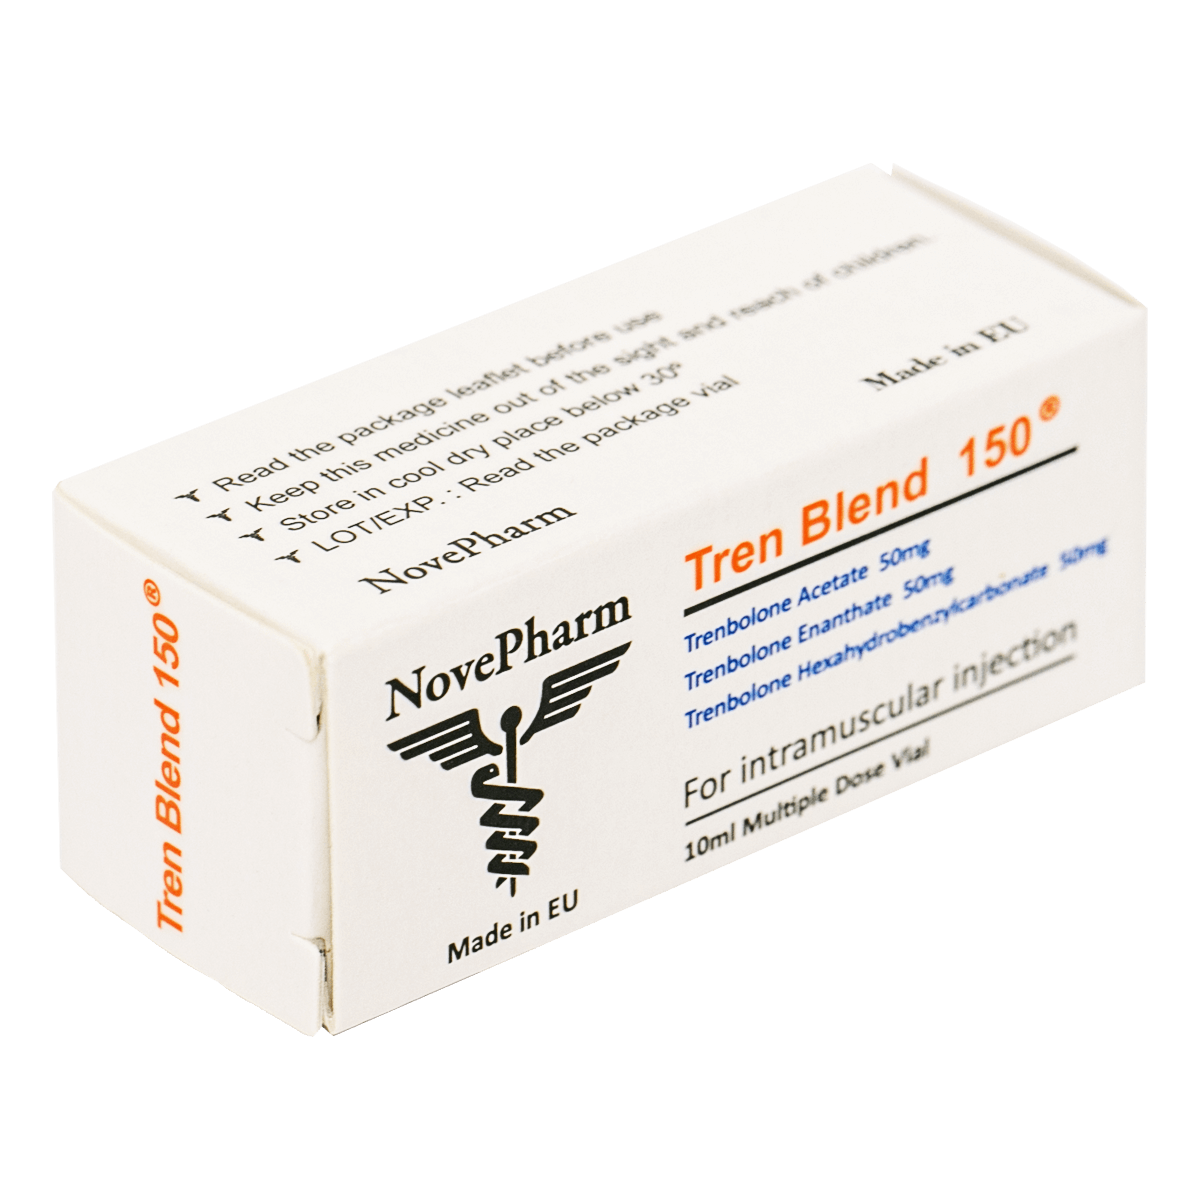 Nove_Pharm_Tren_Blend_Trenbolone_Injection_Anabolic_Steroid_Androgenic_Gain_Mass_Strength_muscle_hunter_xsf_group